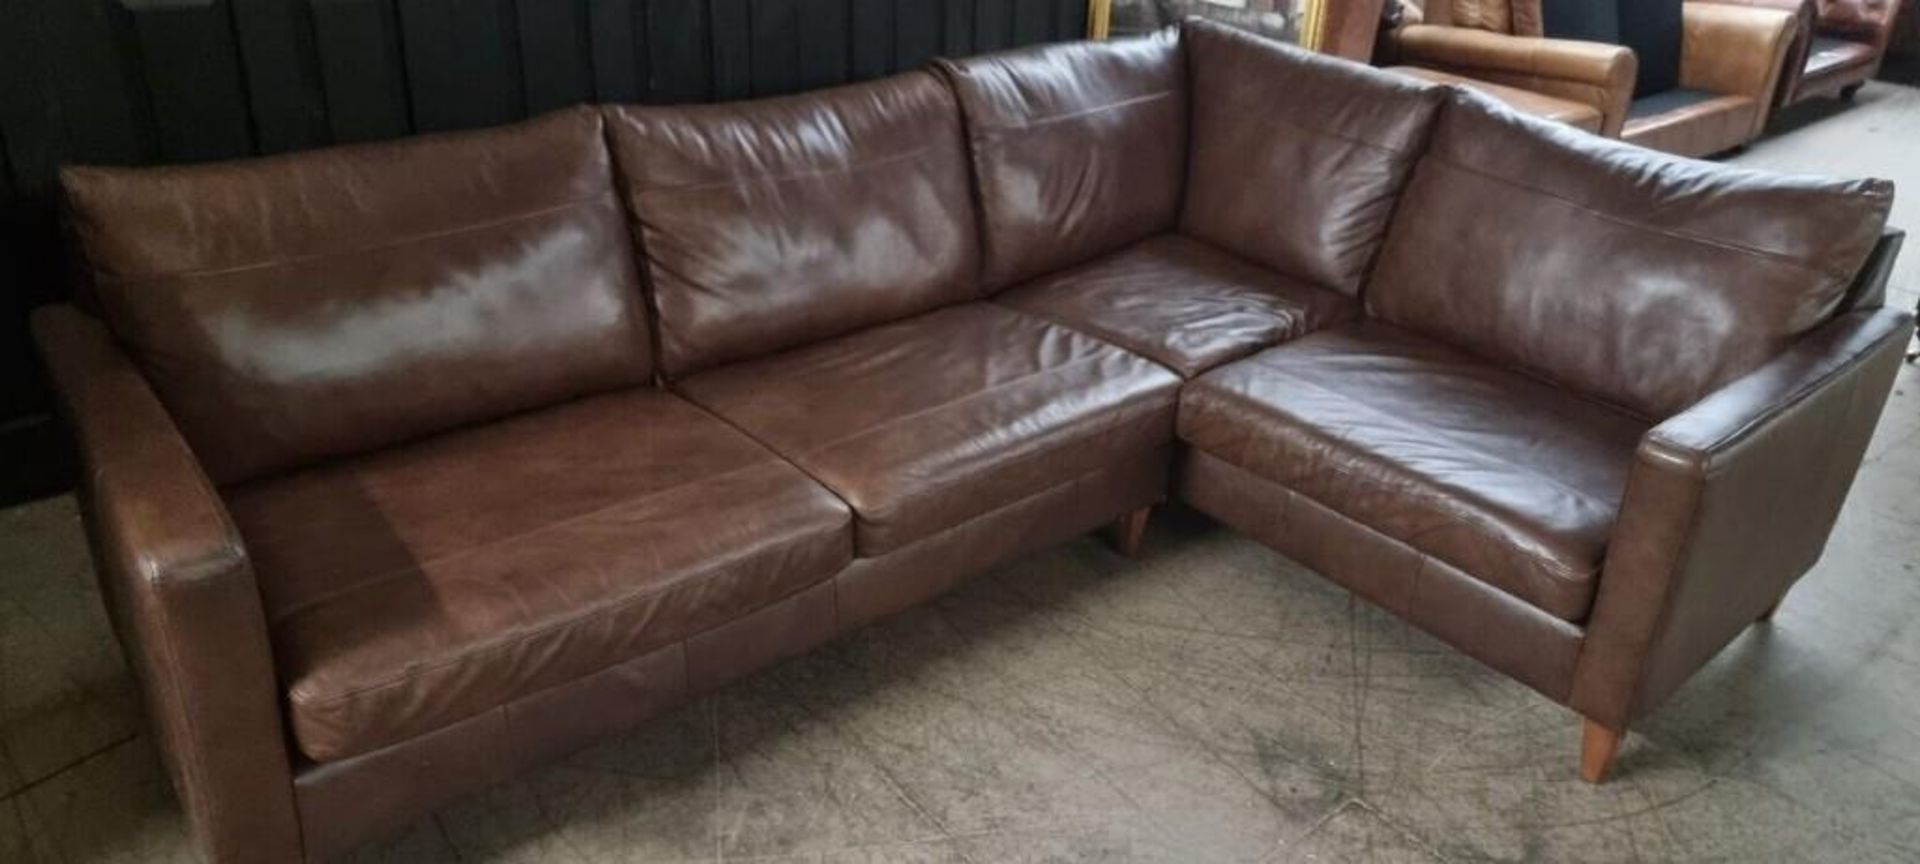 Brand New John Lewis 100% leather Bailey corner sofa in Chestnut Brown - Image 3 of 4